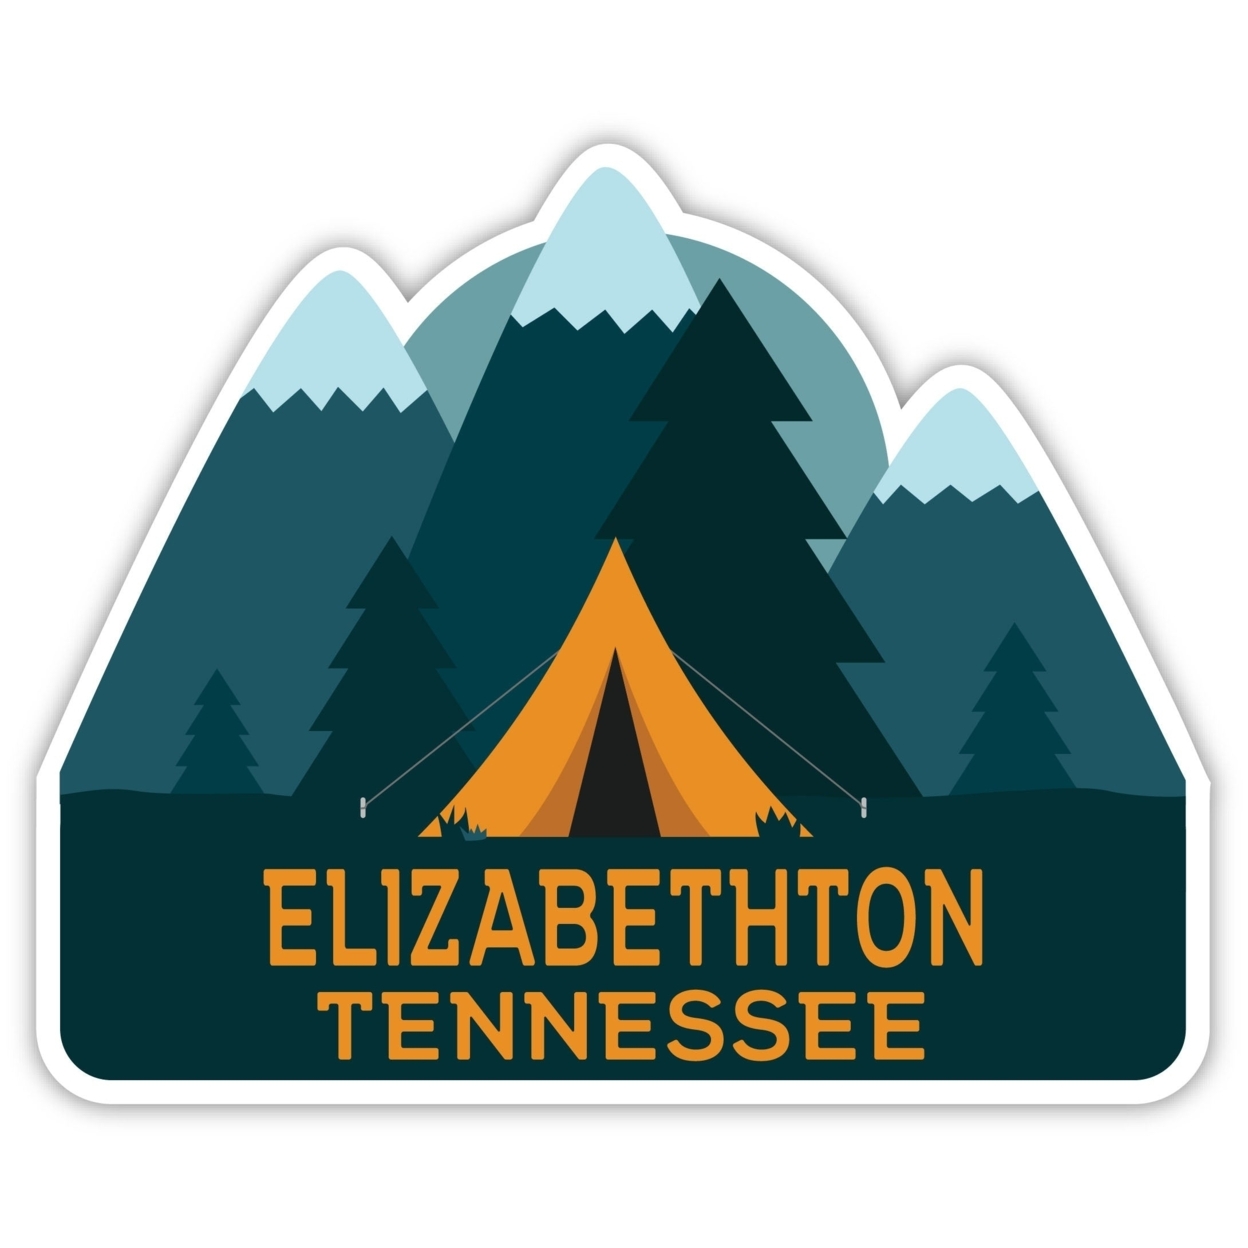 Elizabethton Tennessee Souvenir Decorative Stickers (Choose Theme And Size) - 4-Pack, 10-Inch, Bear